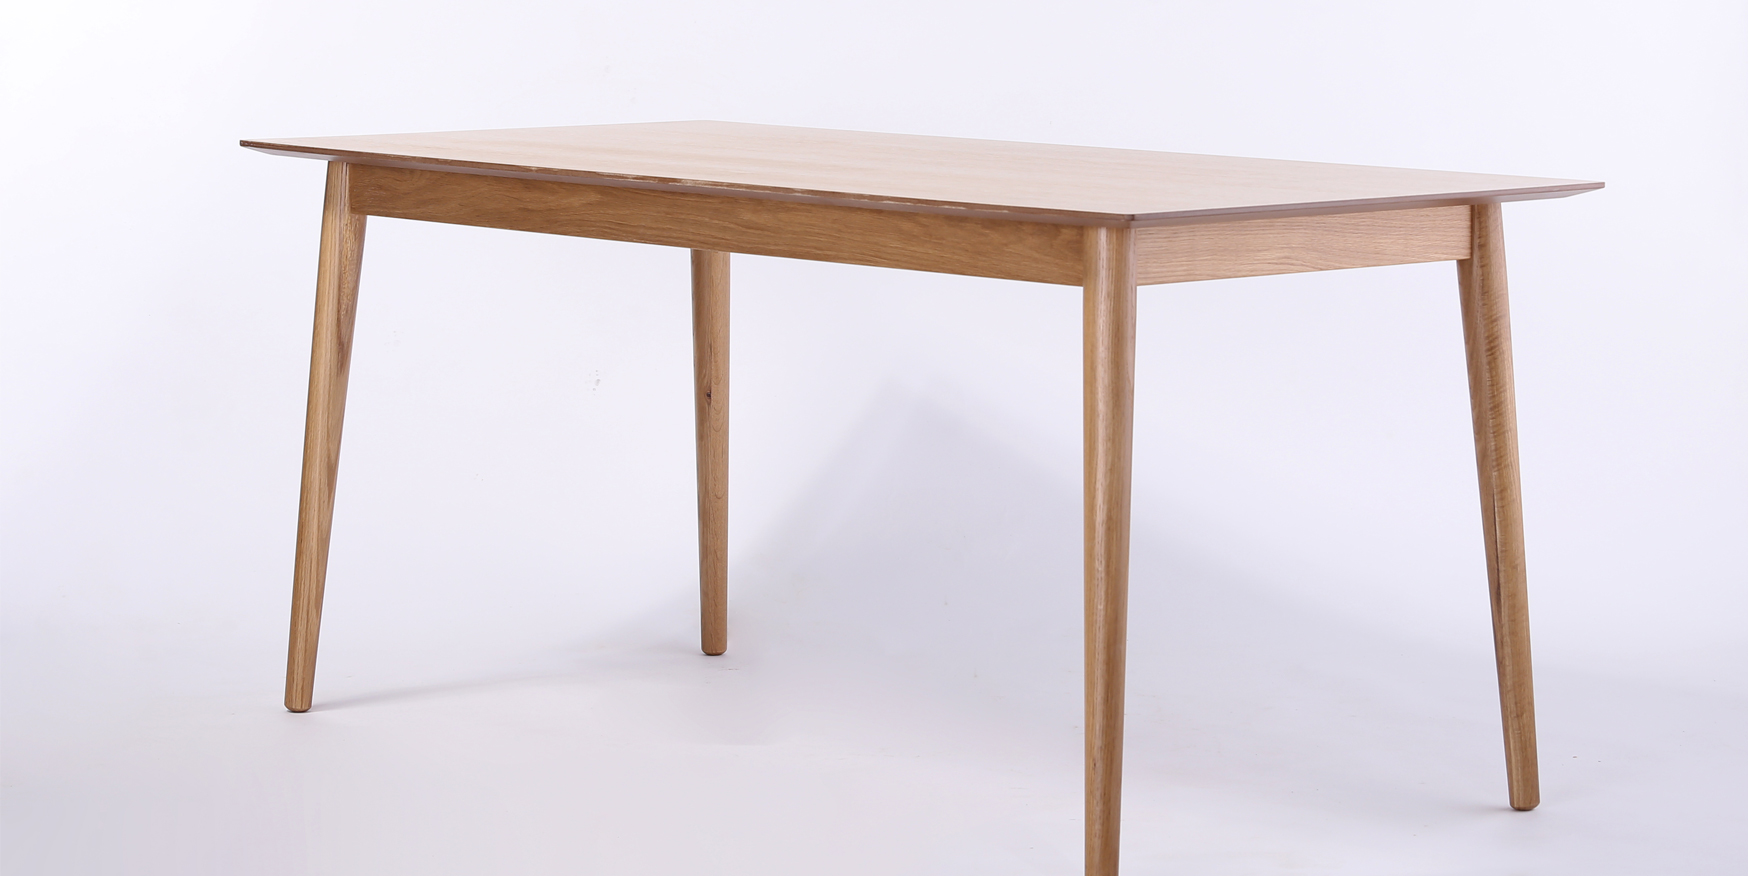 ply board dining table design
